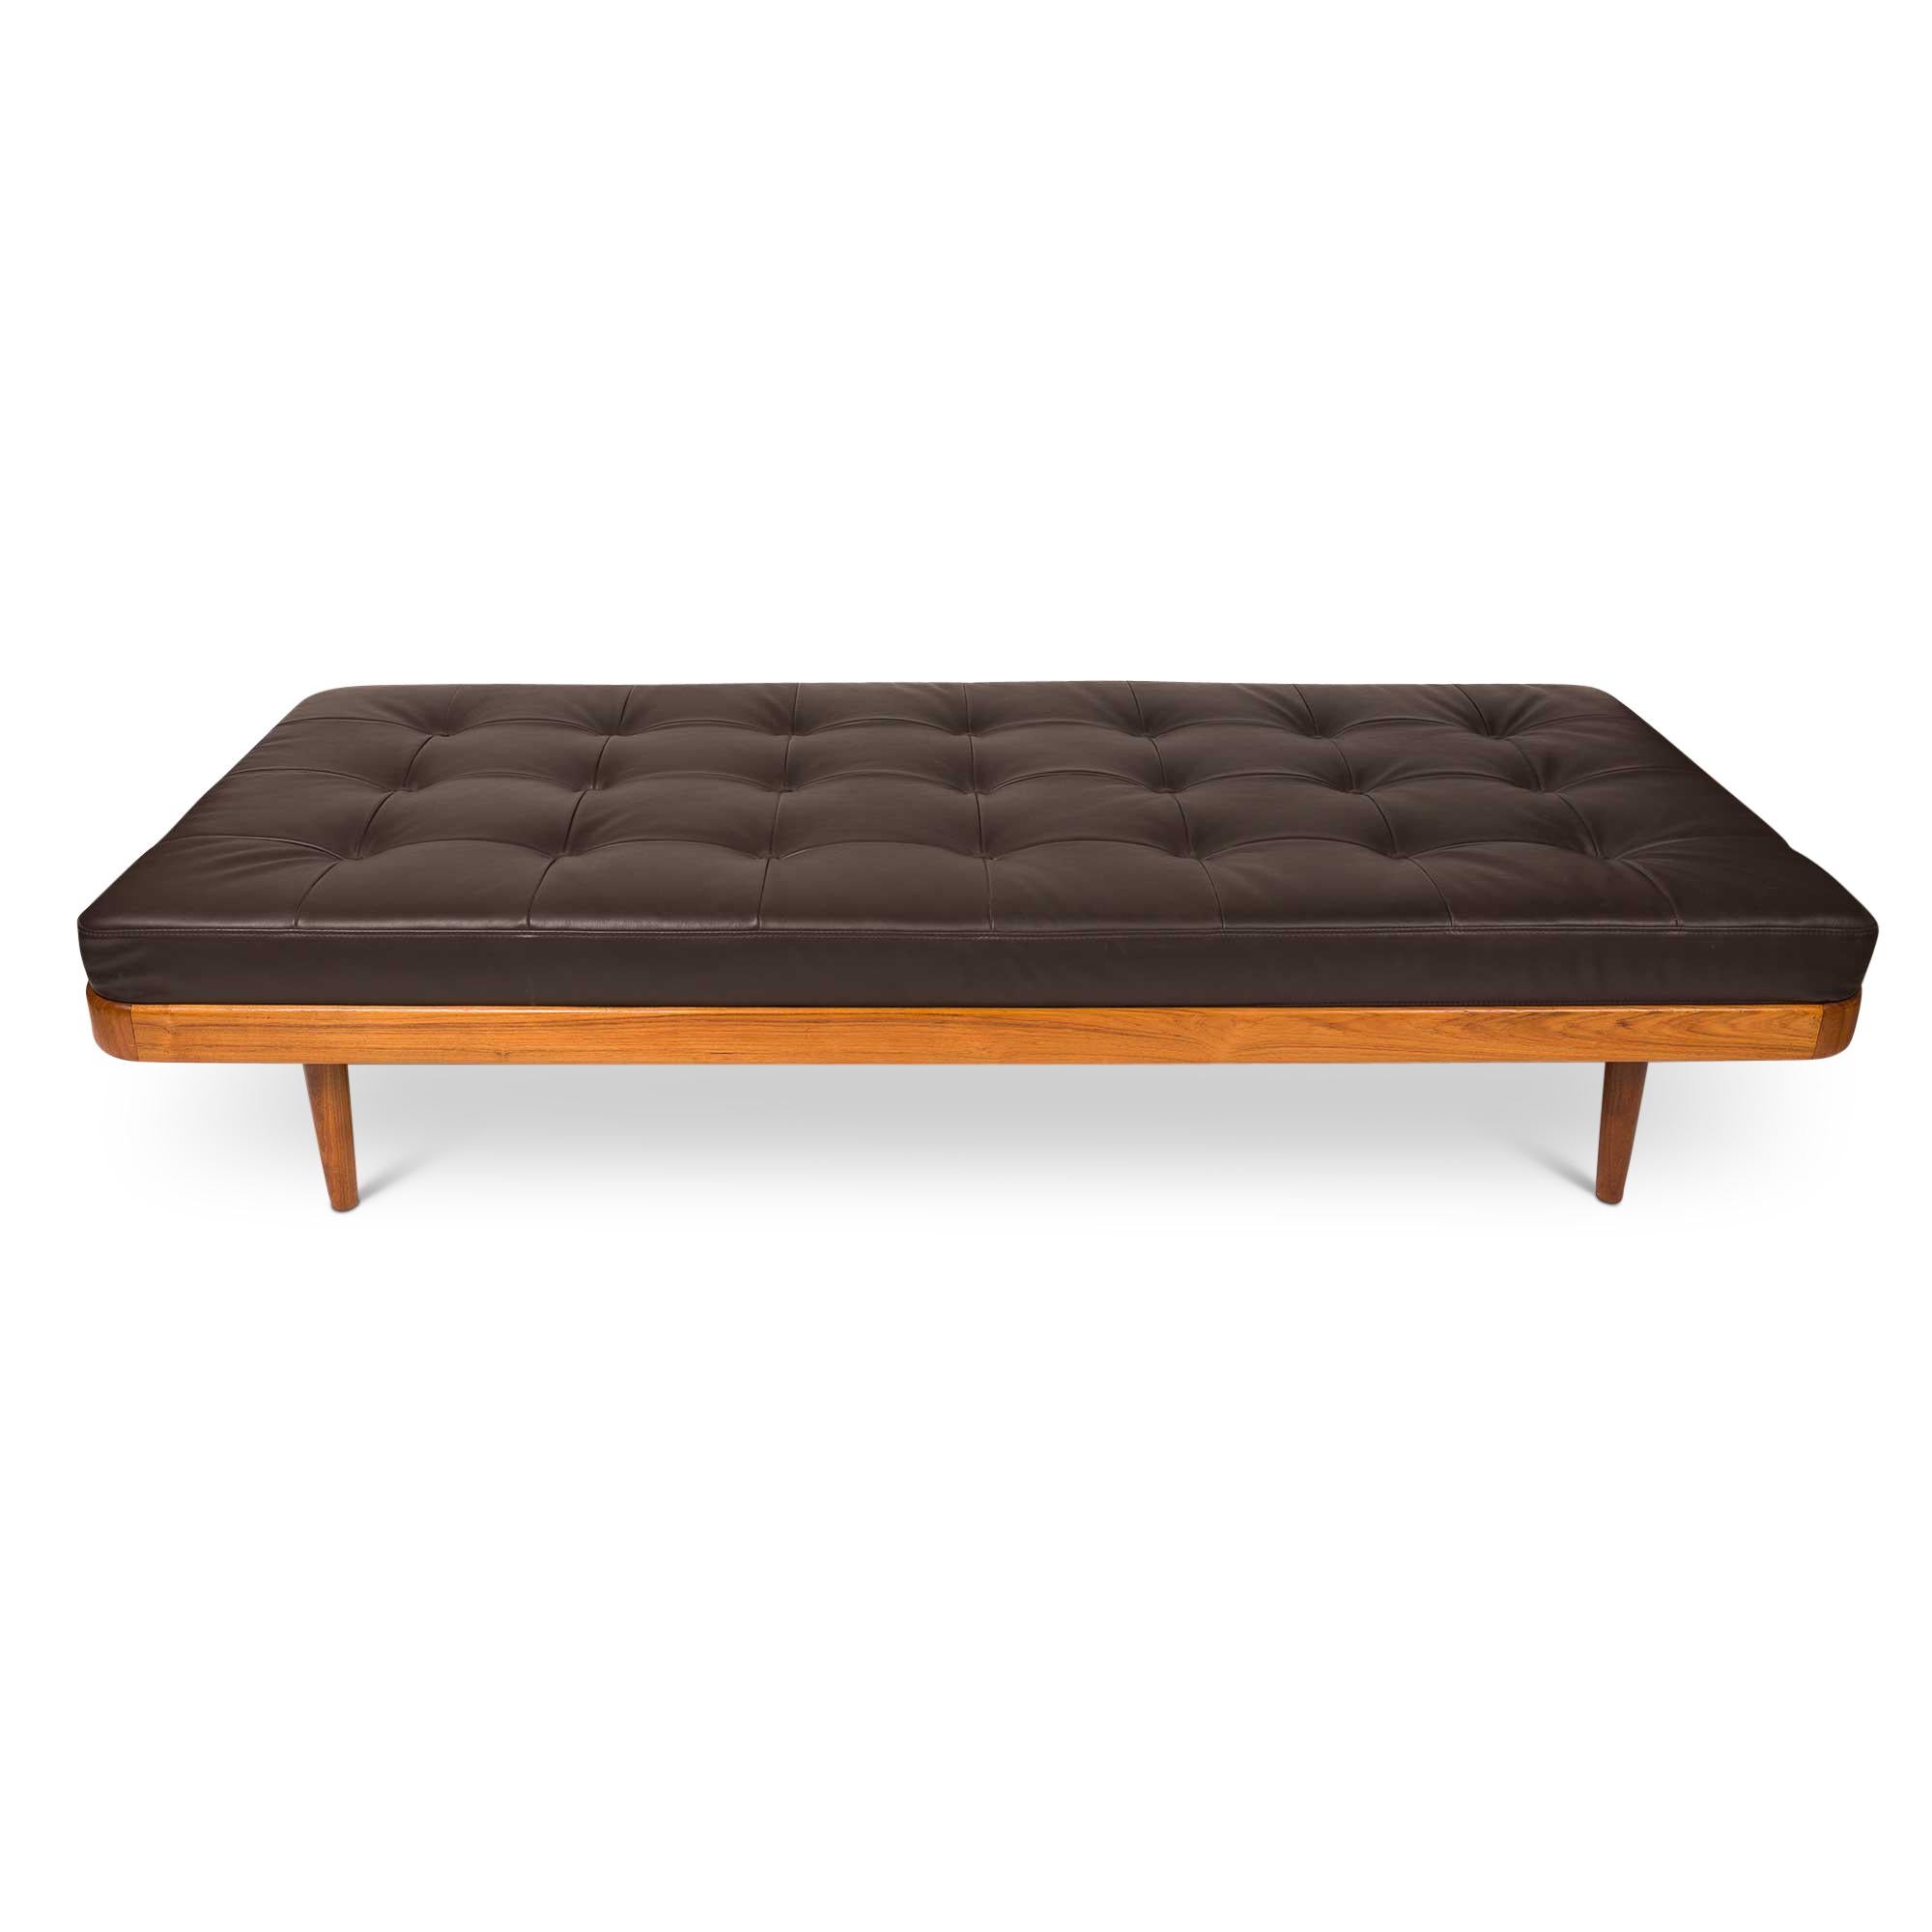 Leather Vintage Danish Mid-Century Daybed by Horsnaes Møbler in Solid Teak 